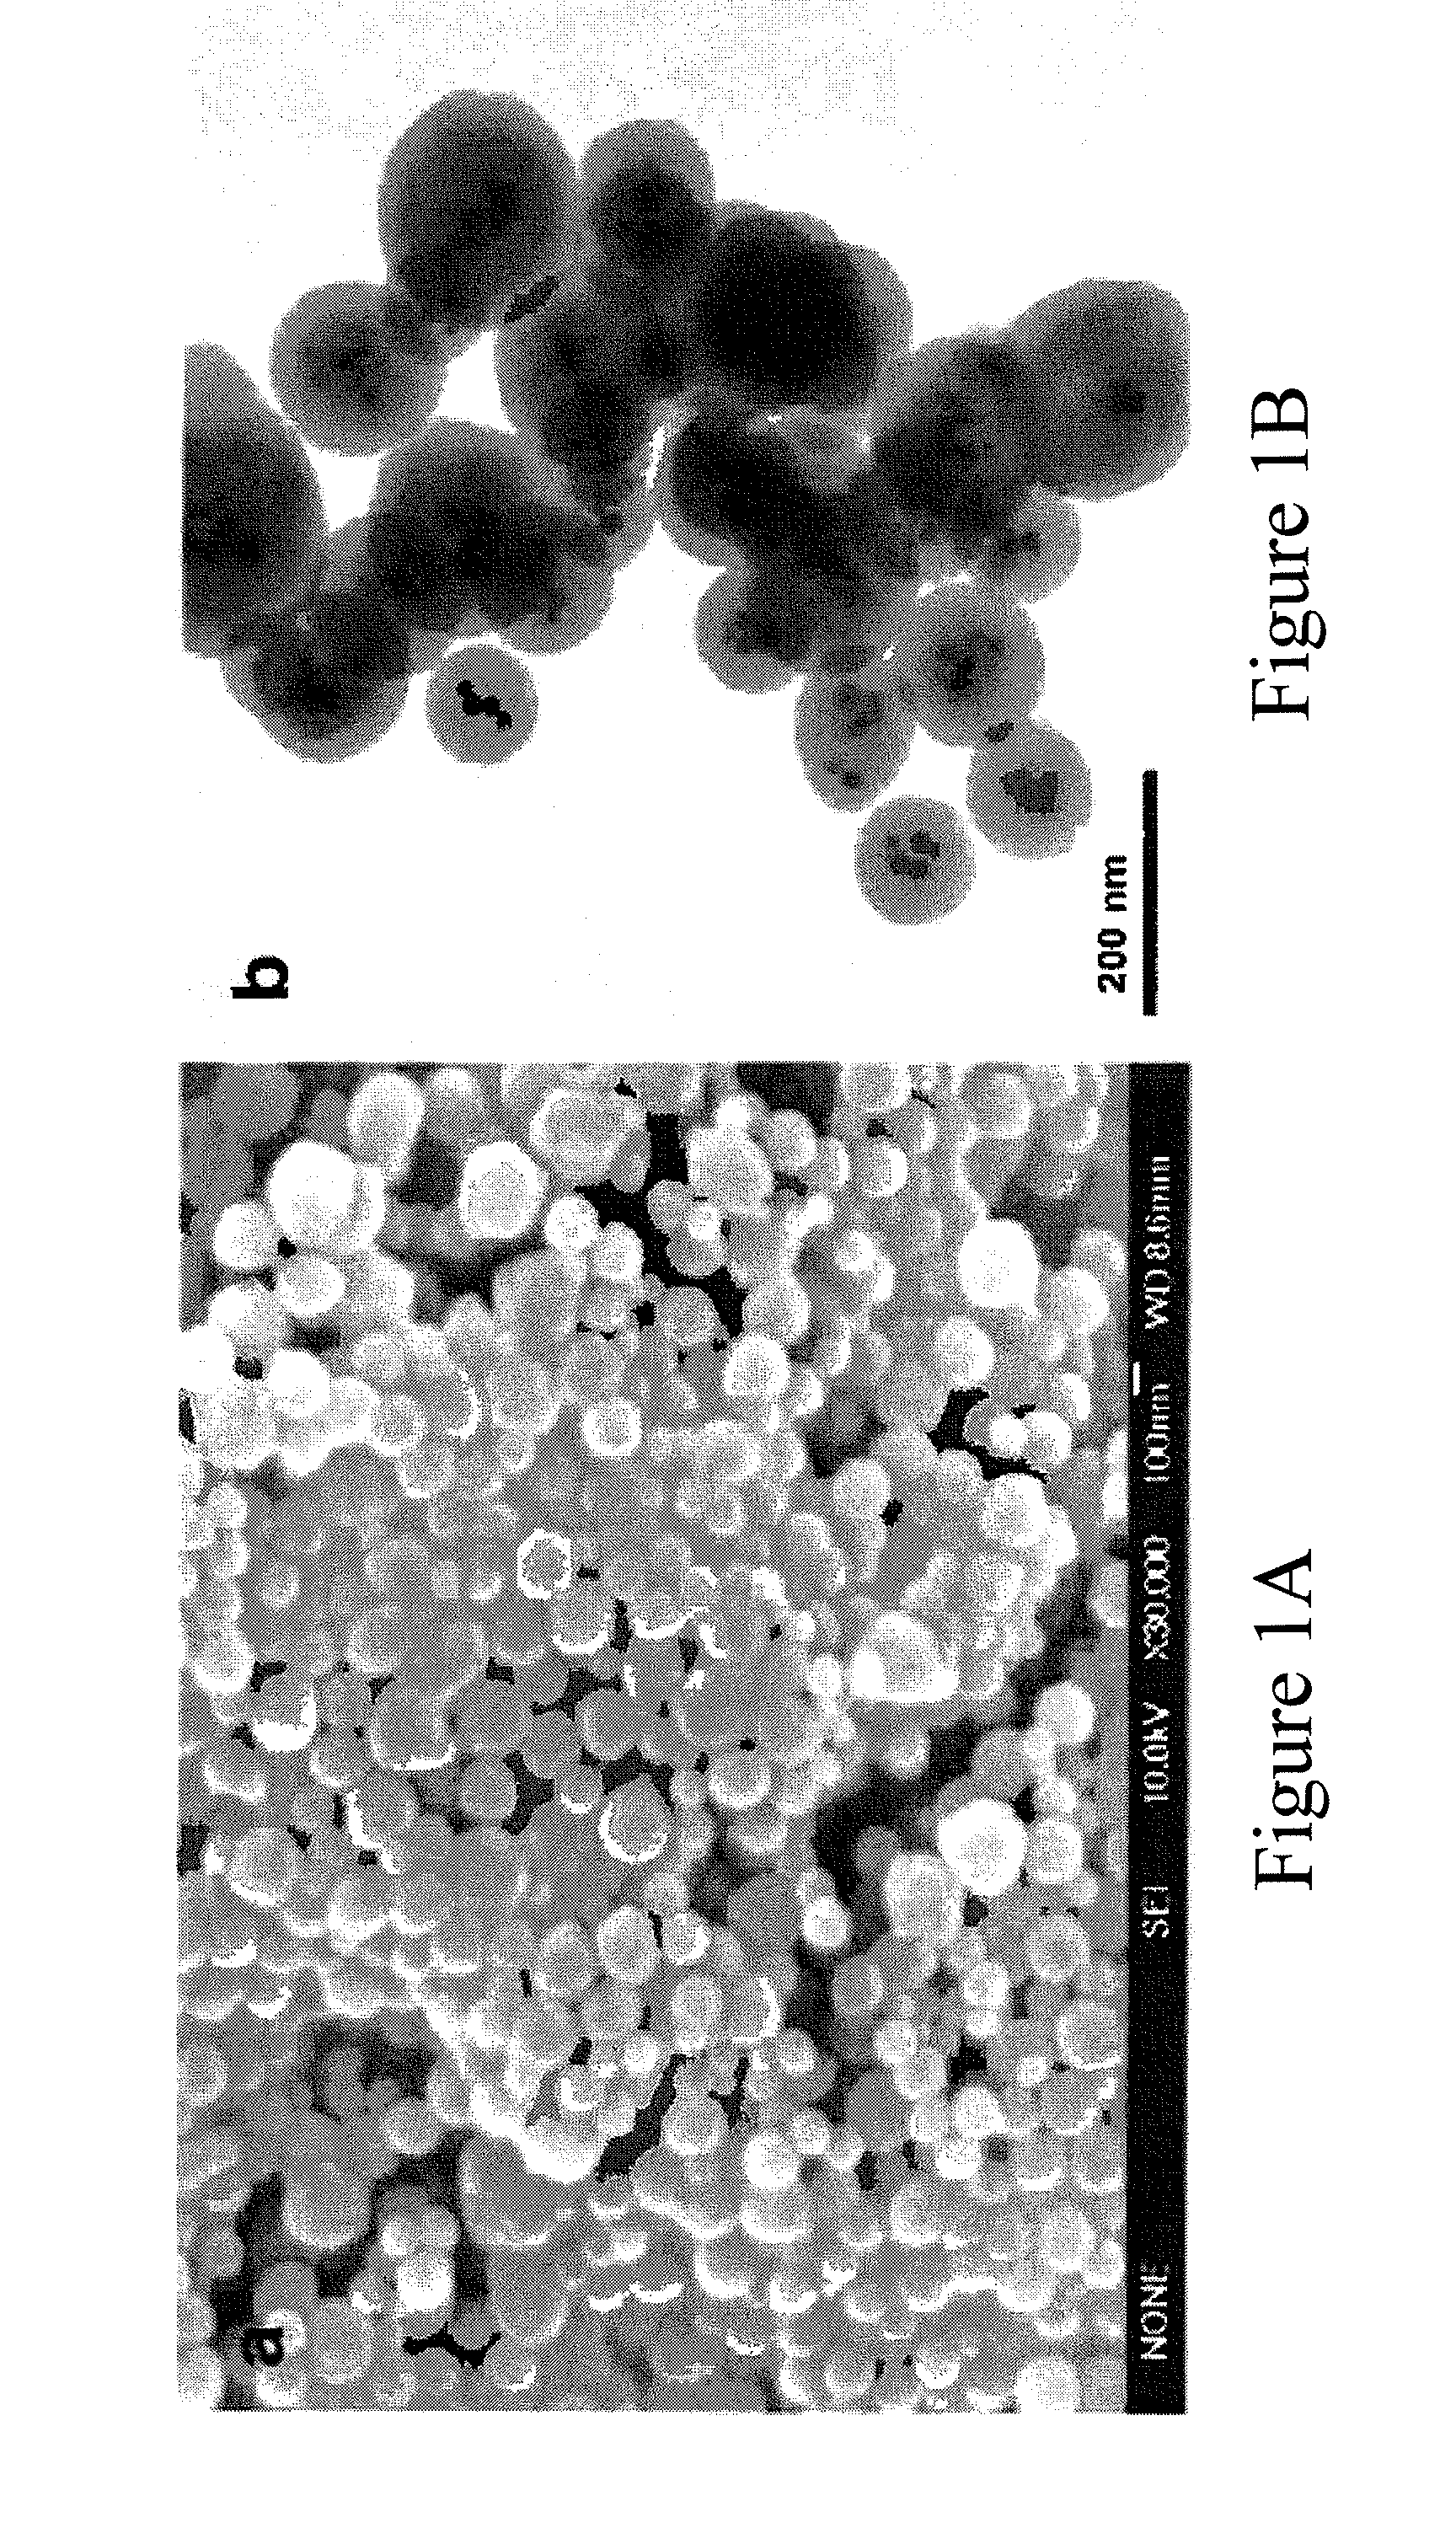 Structured silver-mesoporous silica nanoparticles having antimicrobial activity